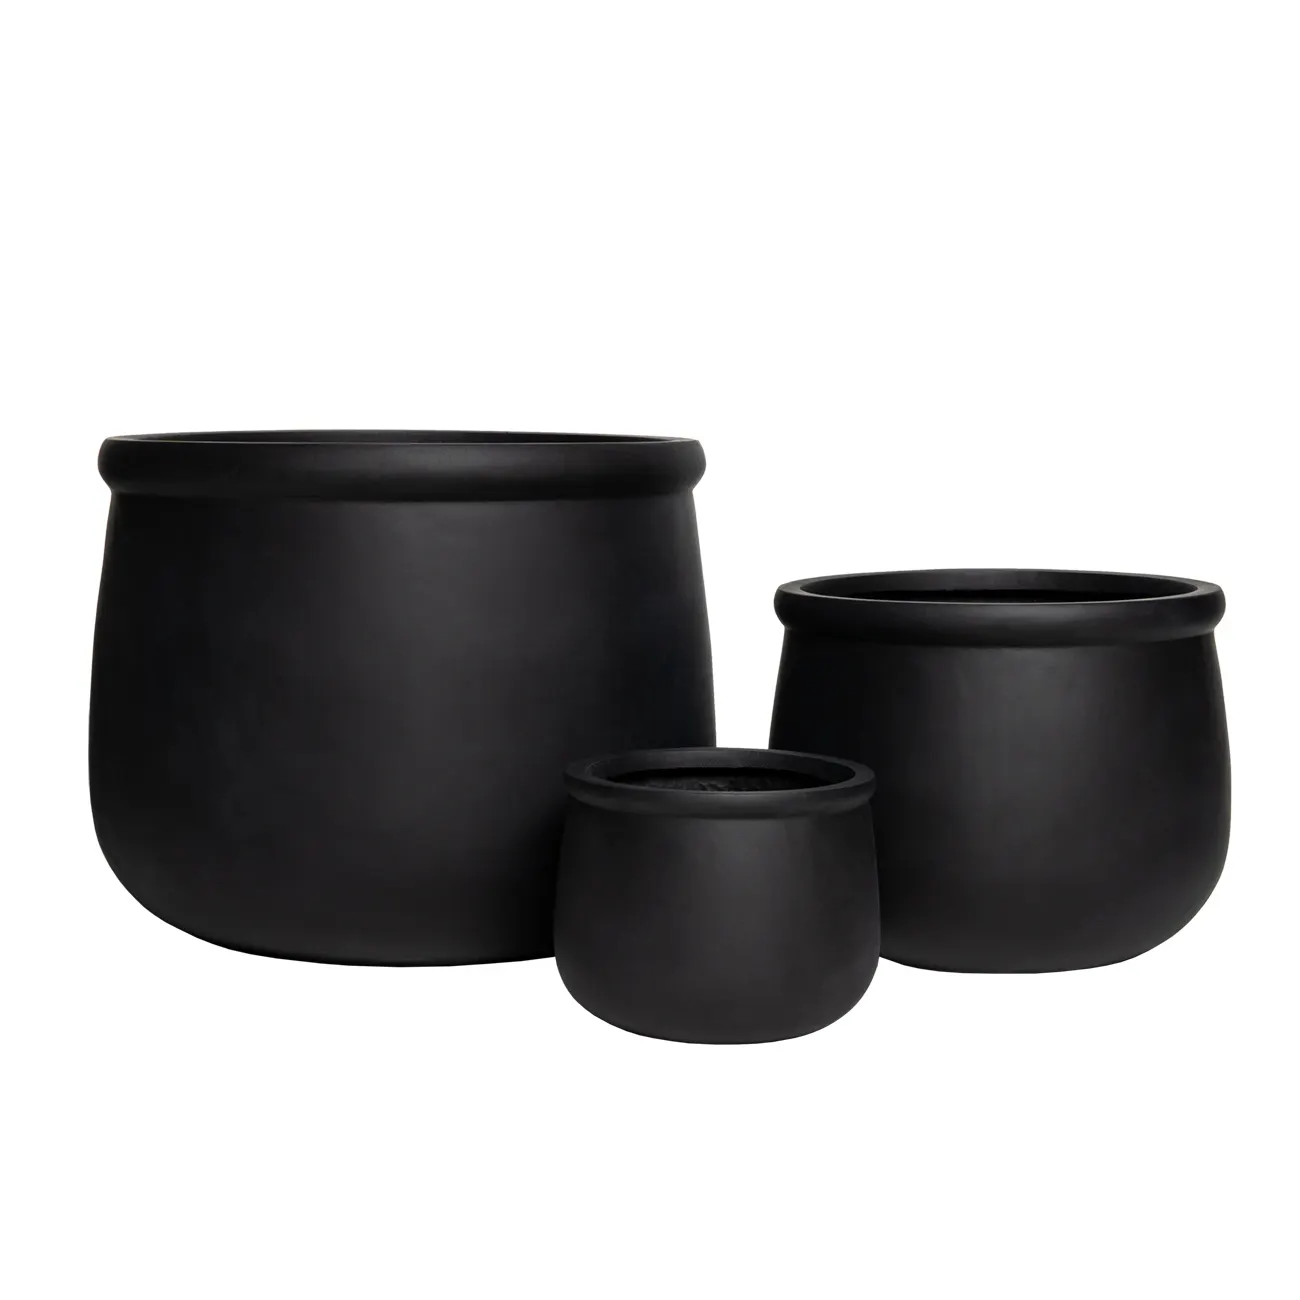 Hotel fiberglass black flower pot planter set for indoor and outdoor luxury decoration made in Vietnam high quality